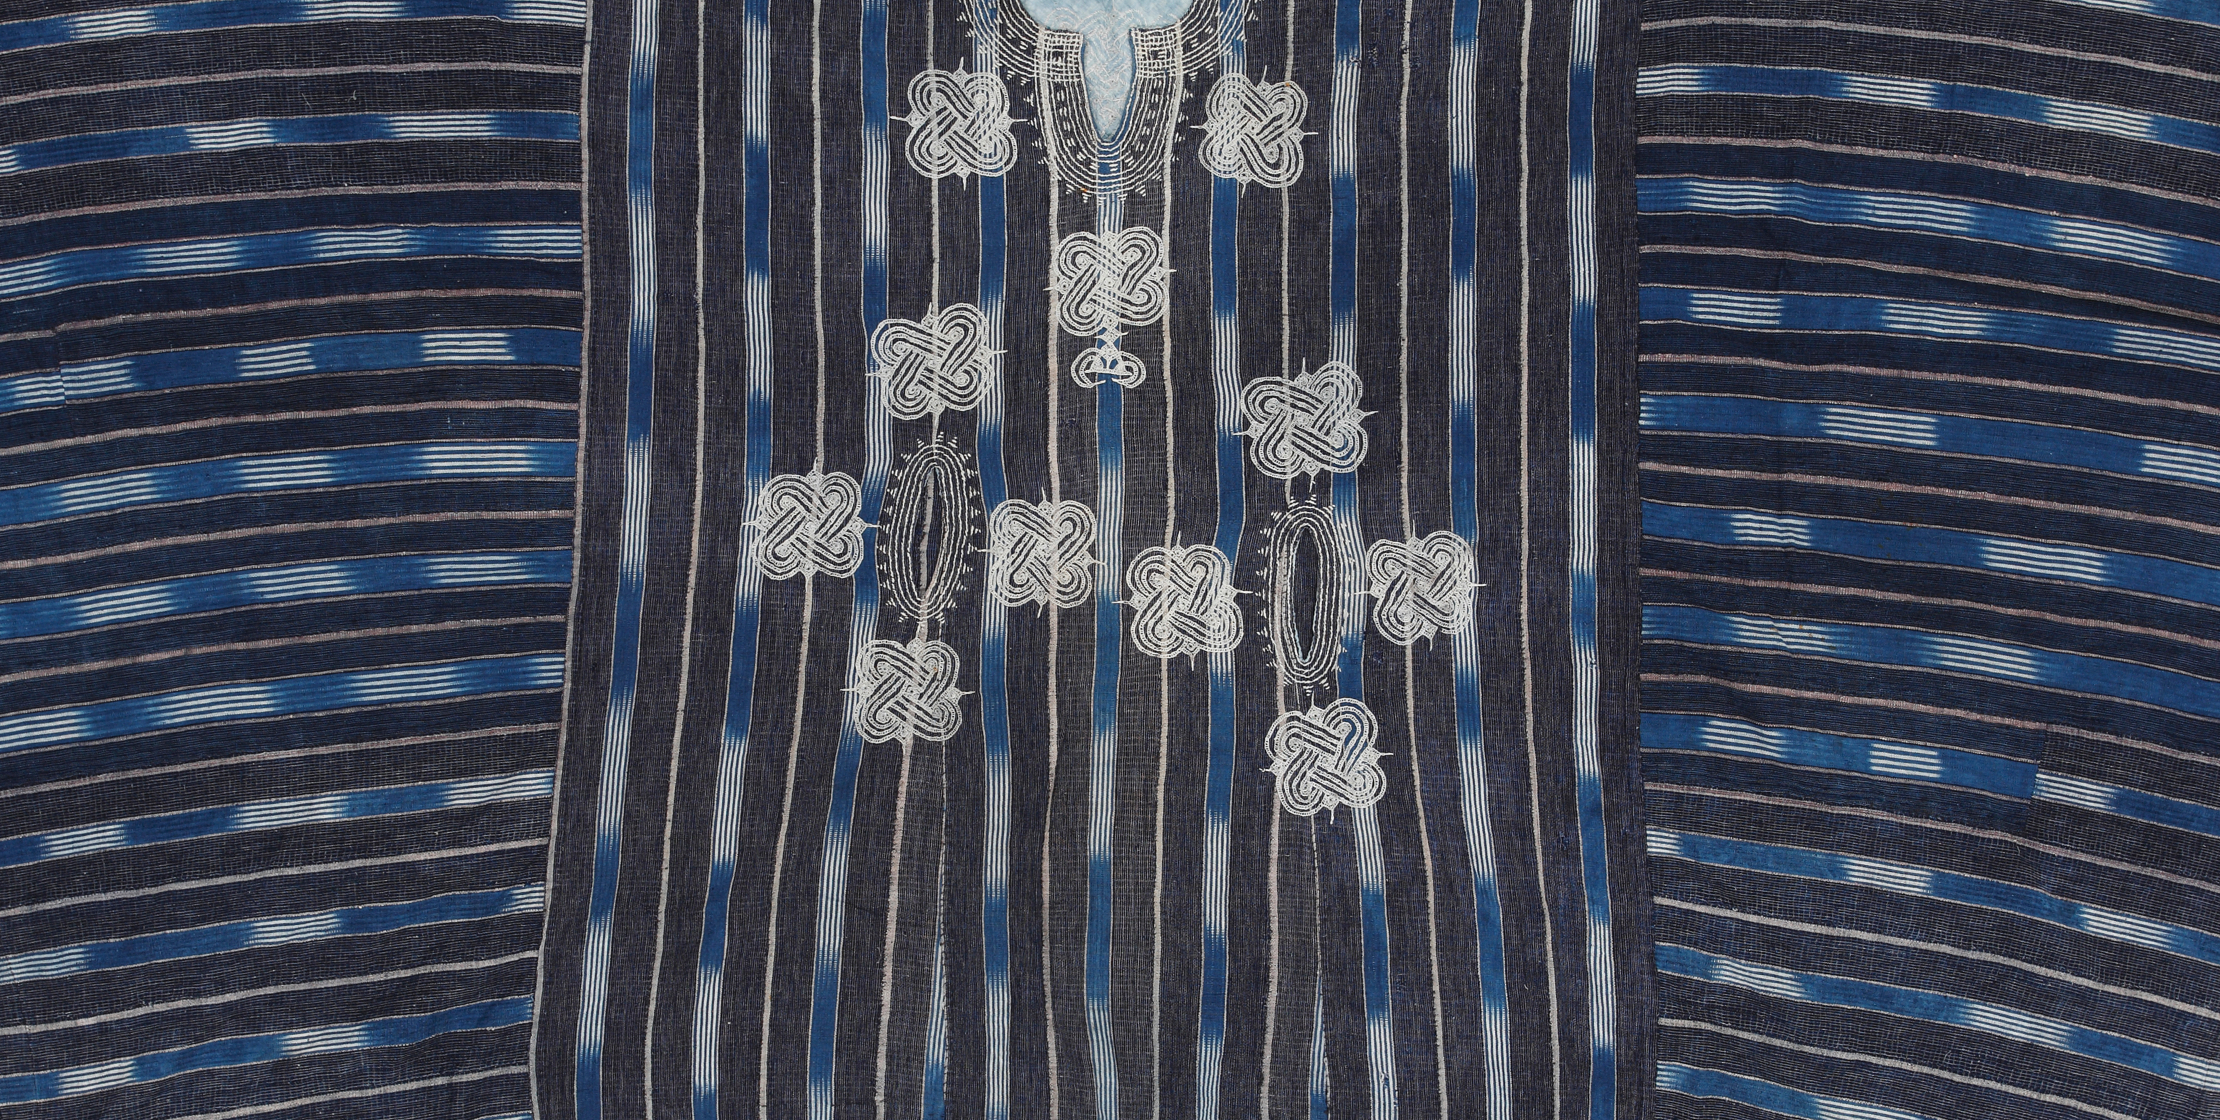 Detail of navy ikat tunic with stripes